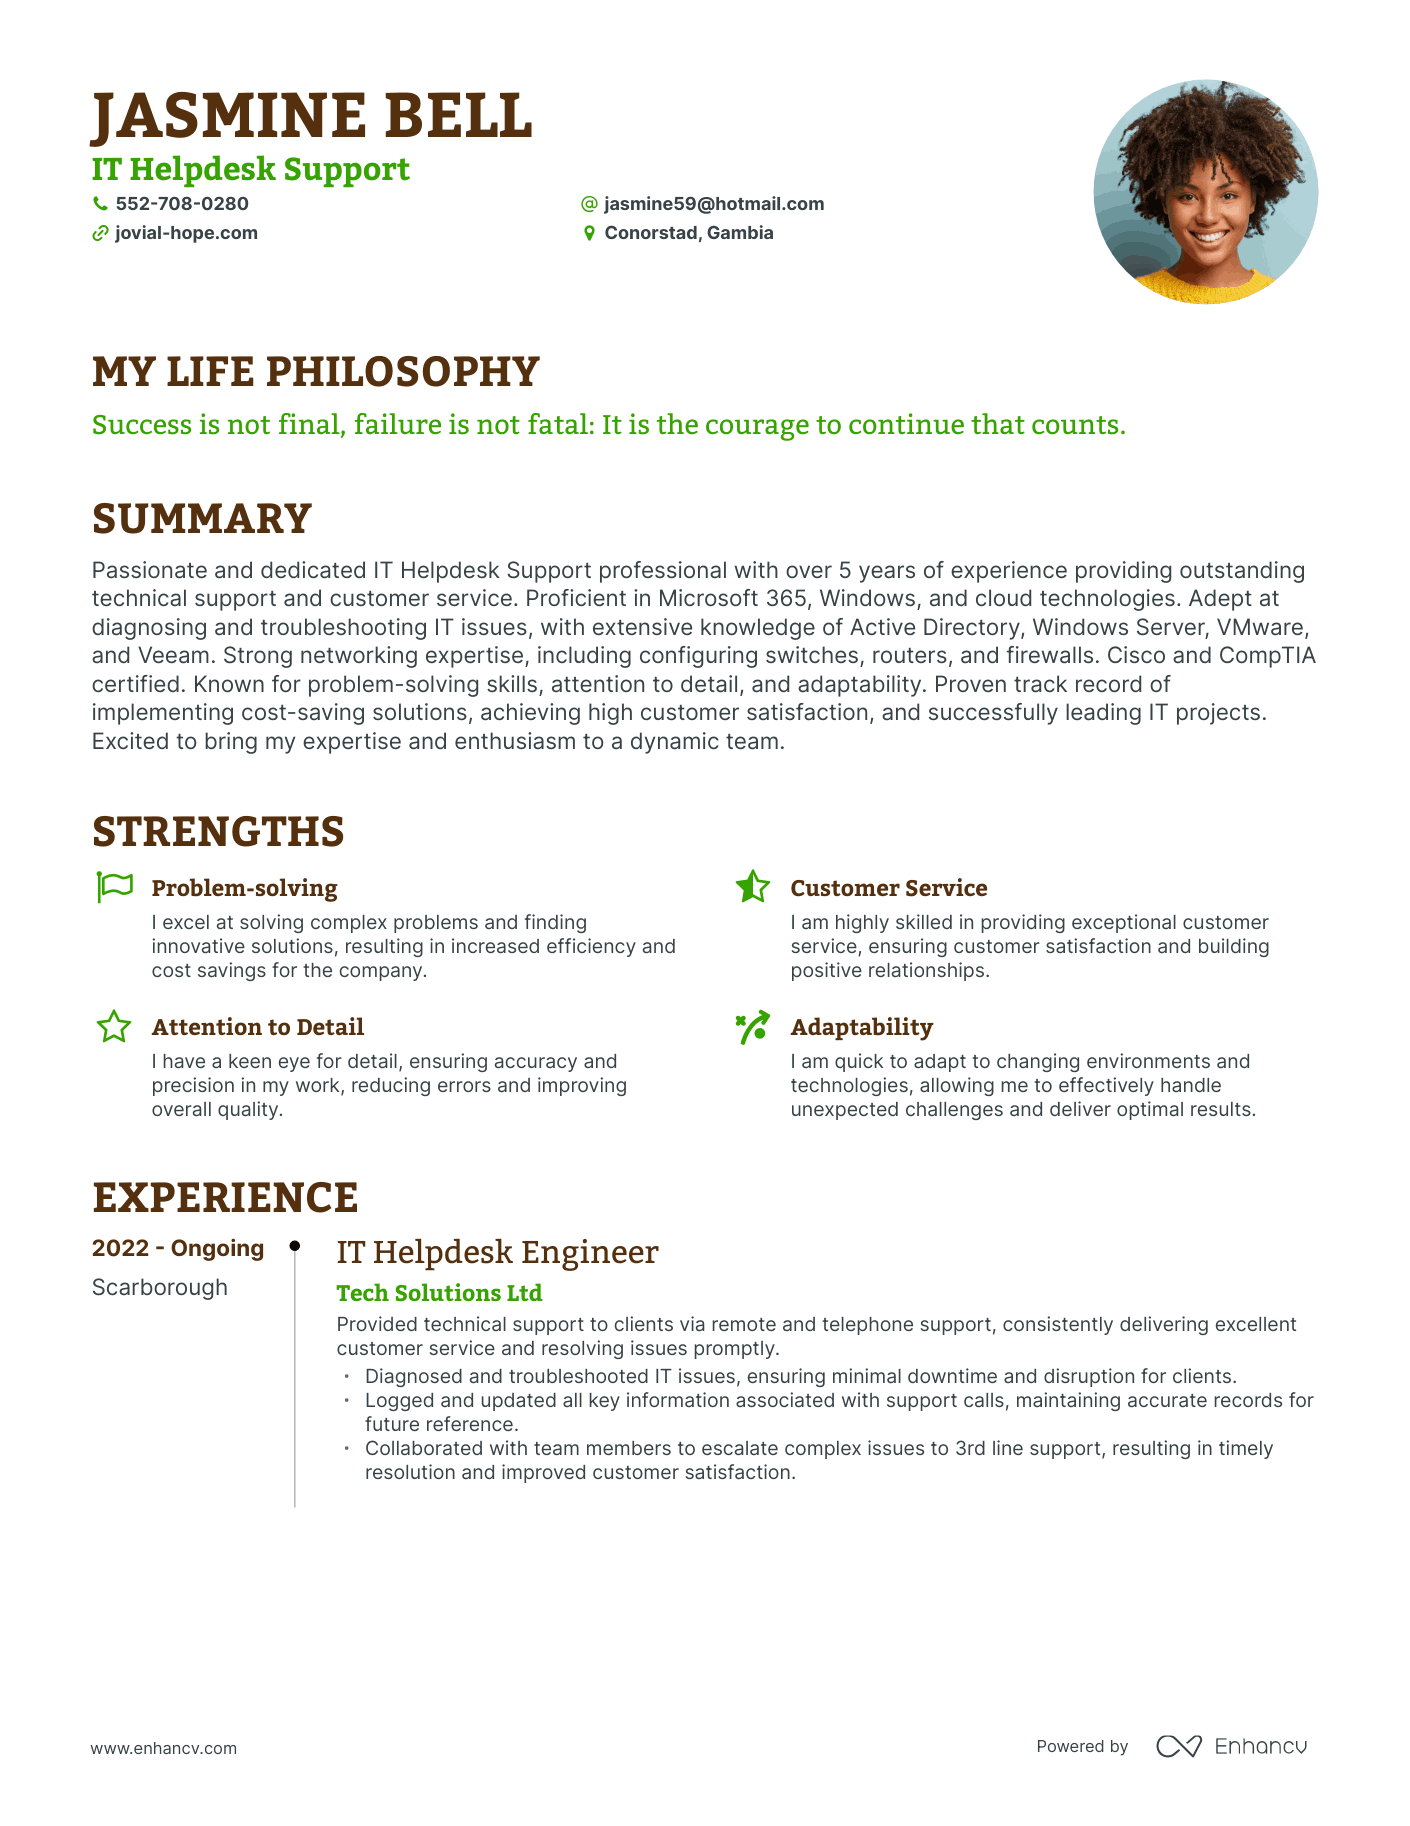 Creative IT Helpdesk Support Resume Example